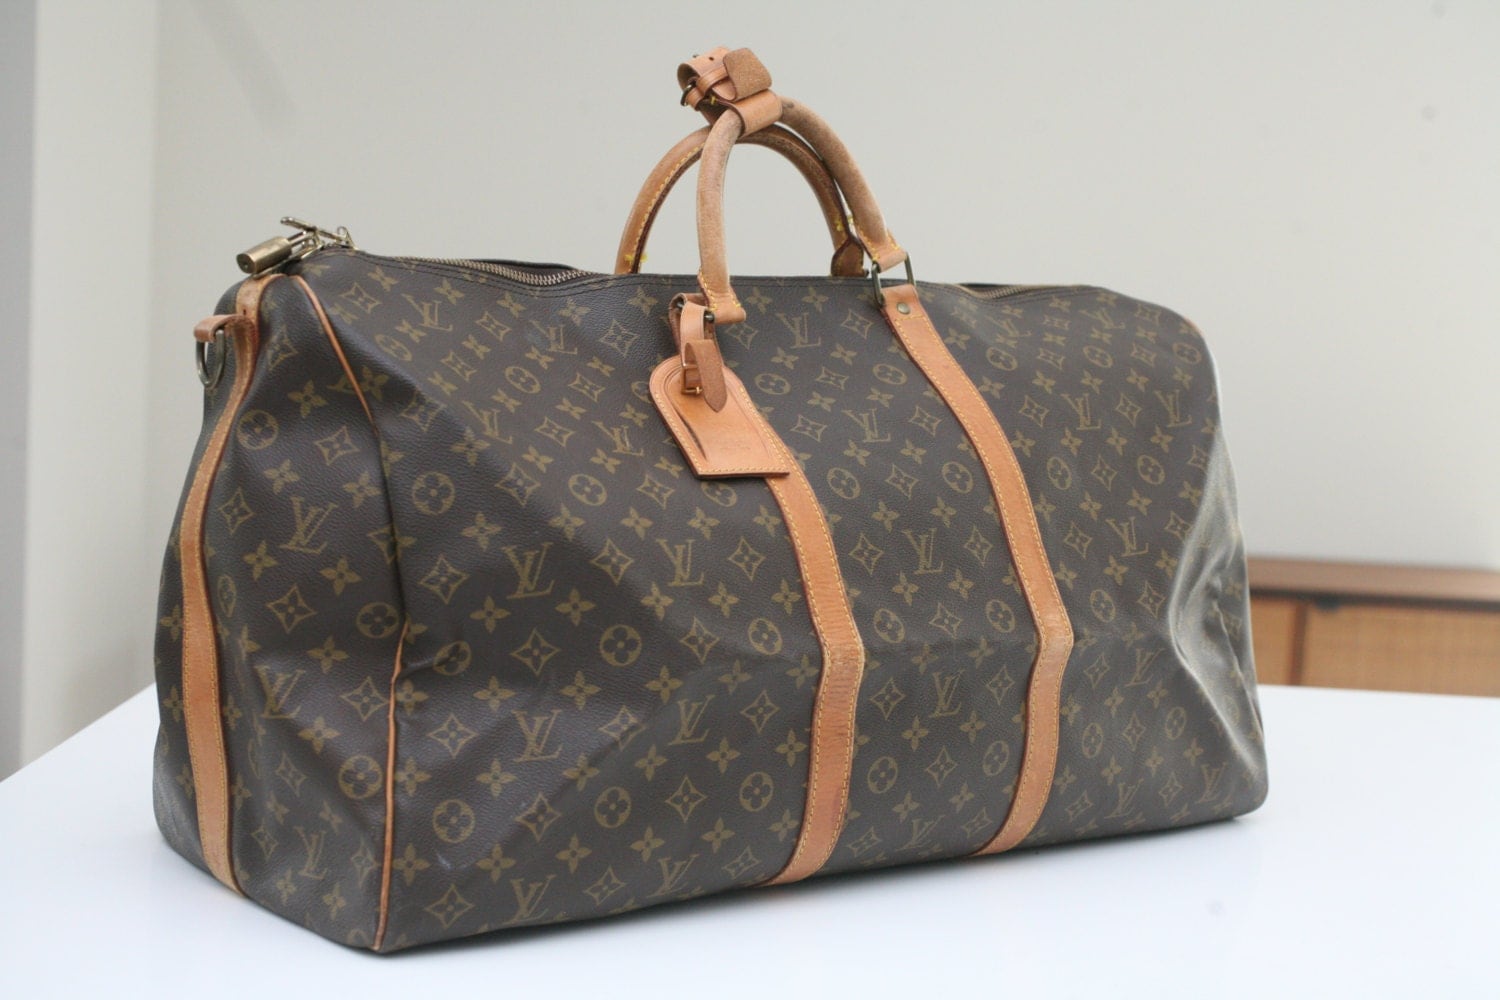 LOUIS VUITTON LV Keepall 60 Vintage Authentic Duffle Bag with